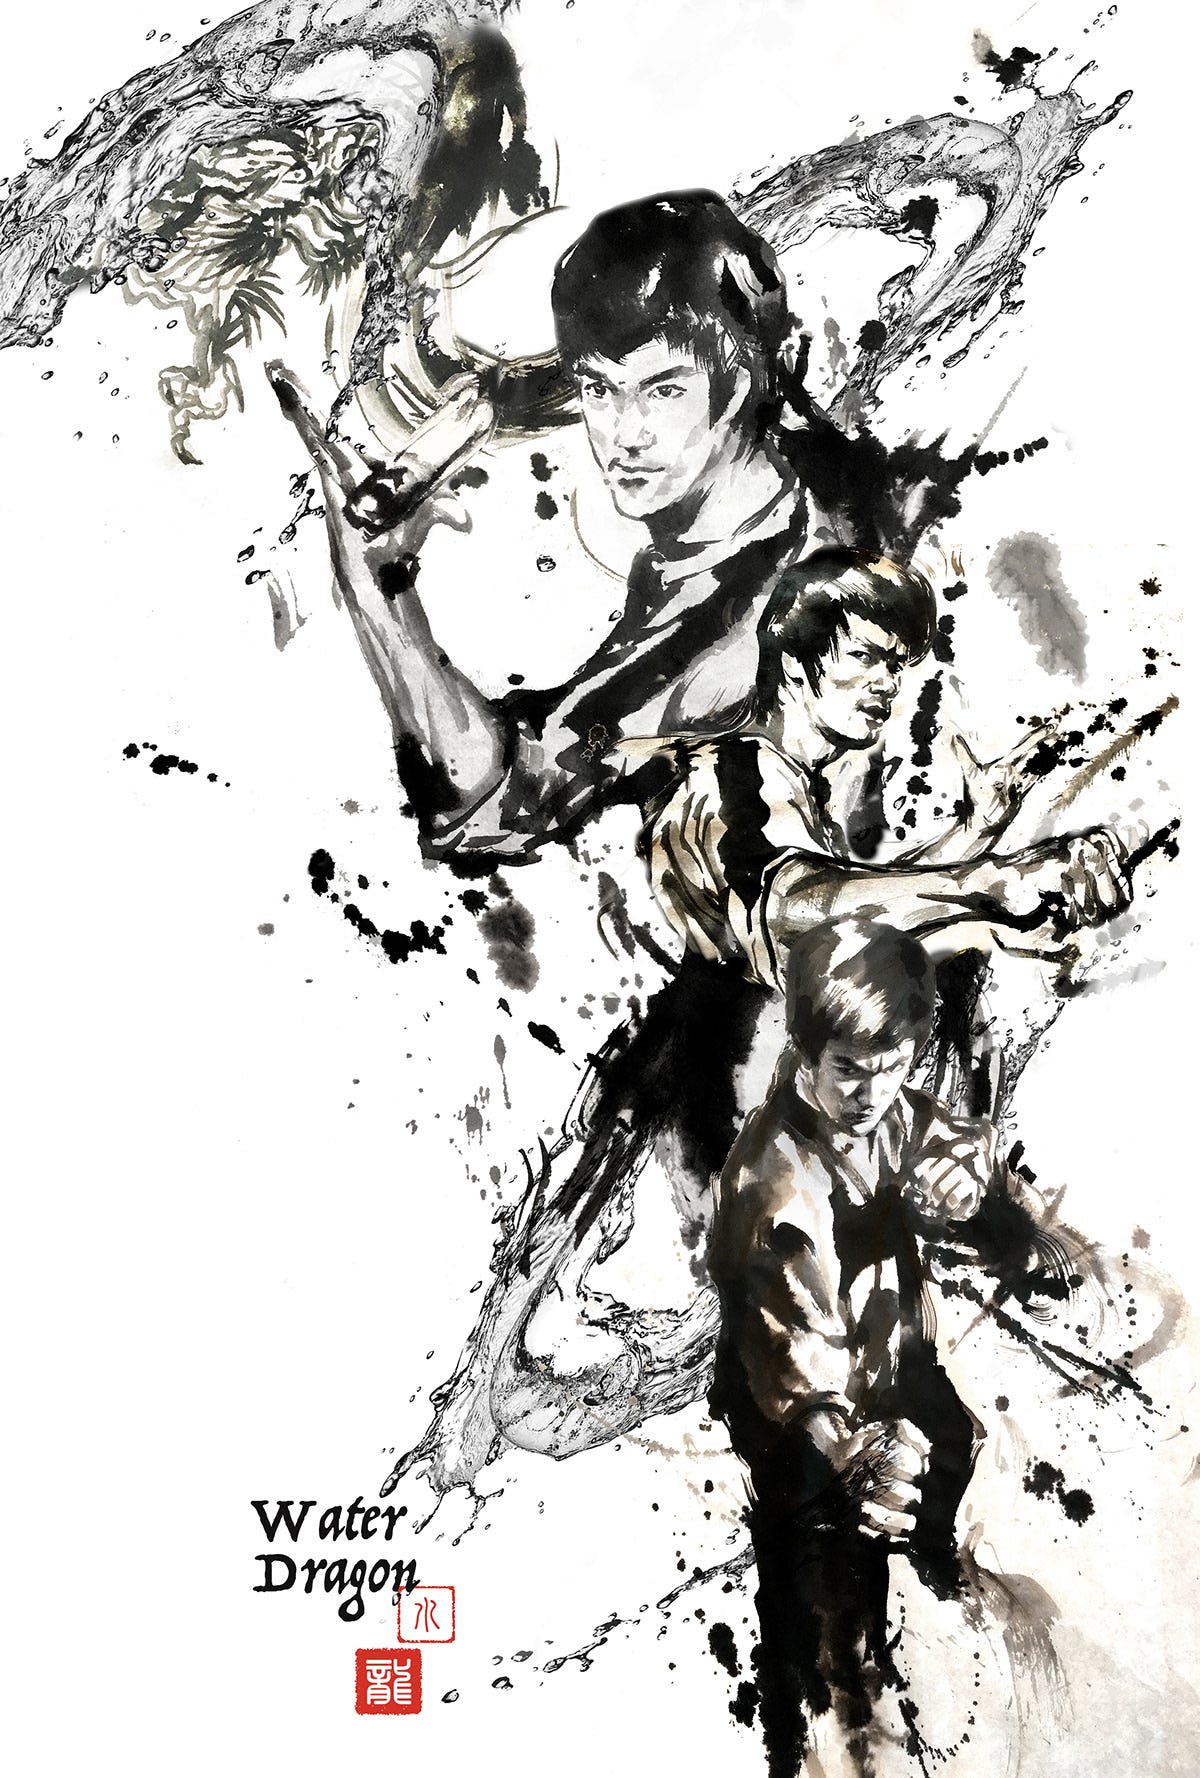 ESPN Bruce Lee: Be Water movie poster on Behance